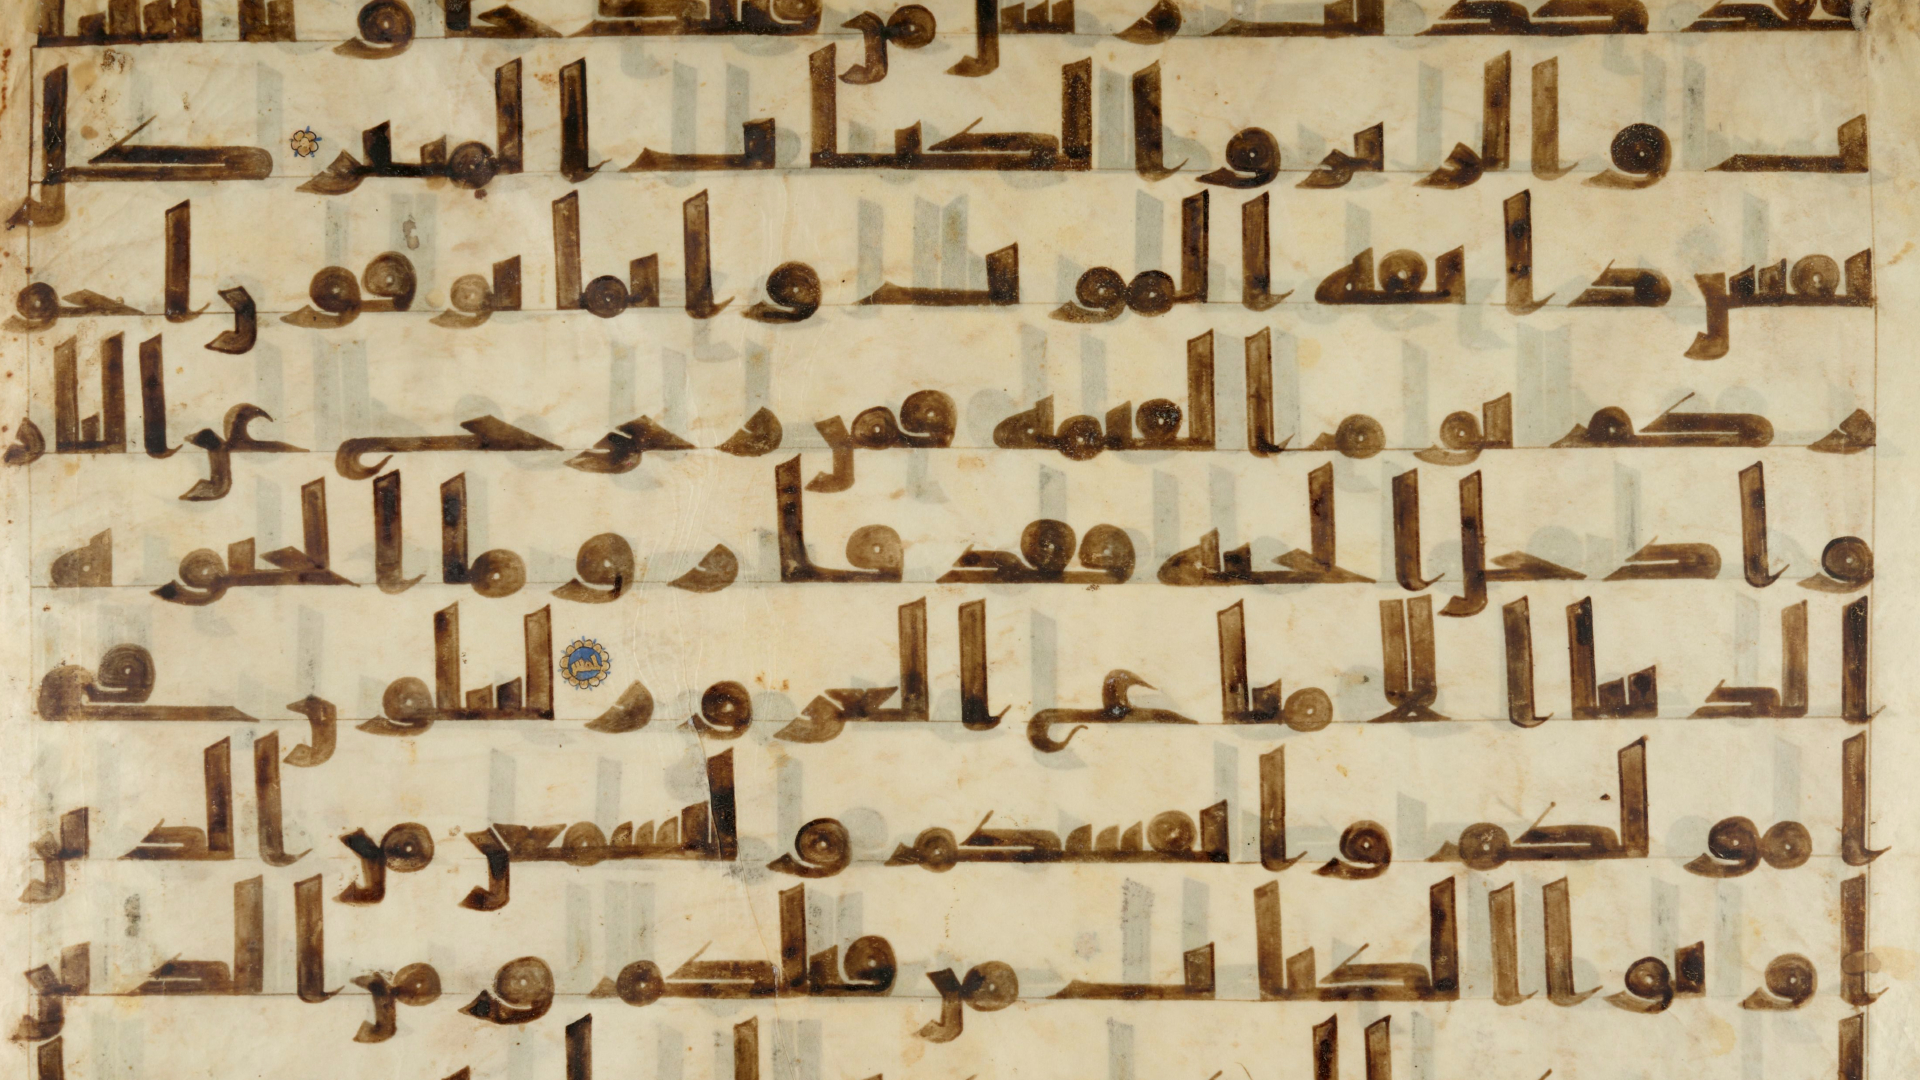 The Qurʿānic manuscript                                      attributed to caliph ʿUthmān ibn                                      ʿAffān discovered in the Mosque of                                      ʿAmr ibn al-ʿĀṣ (Codex Amrensis 22)